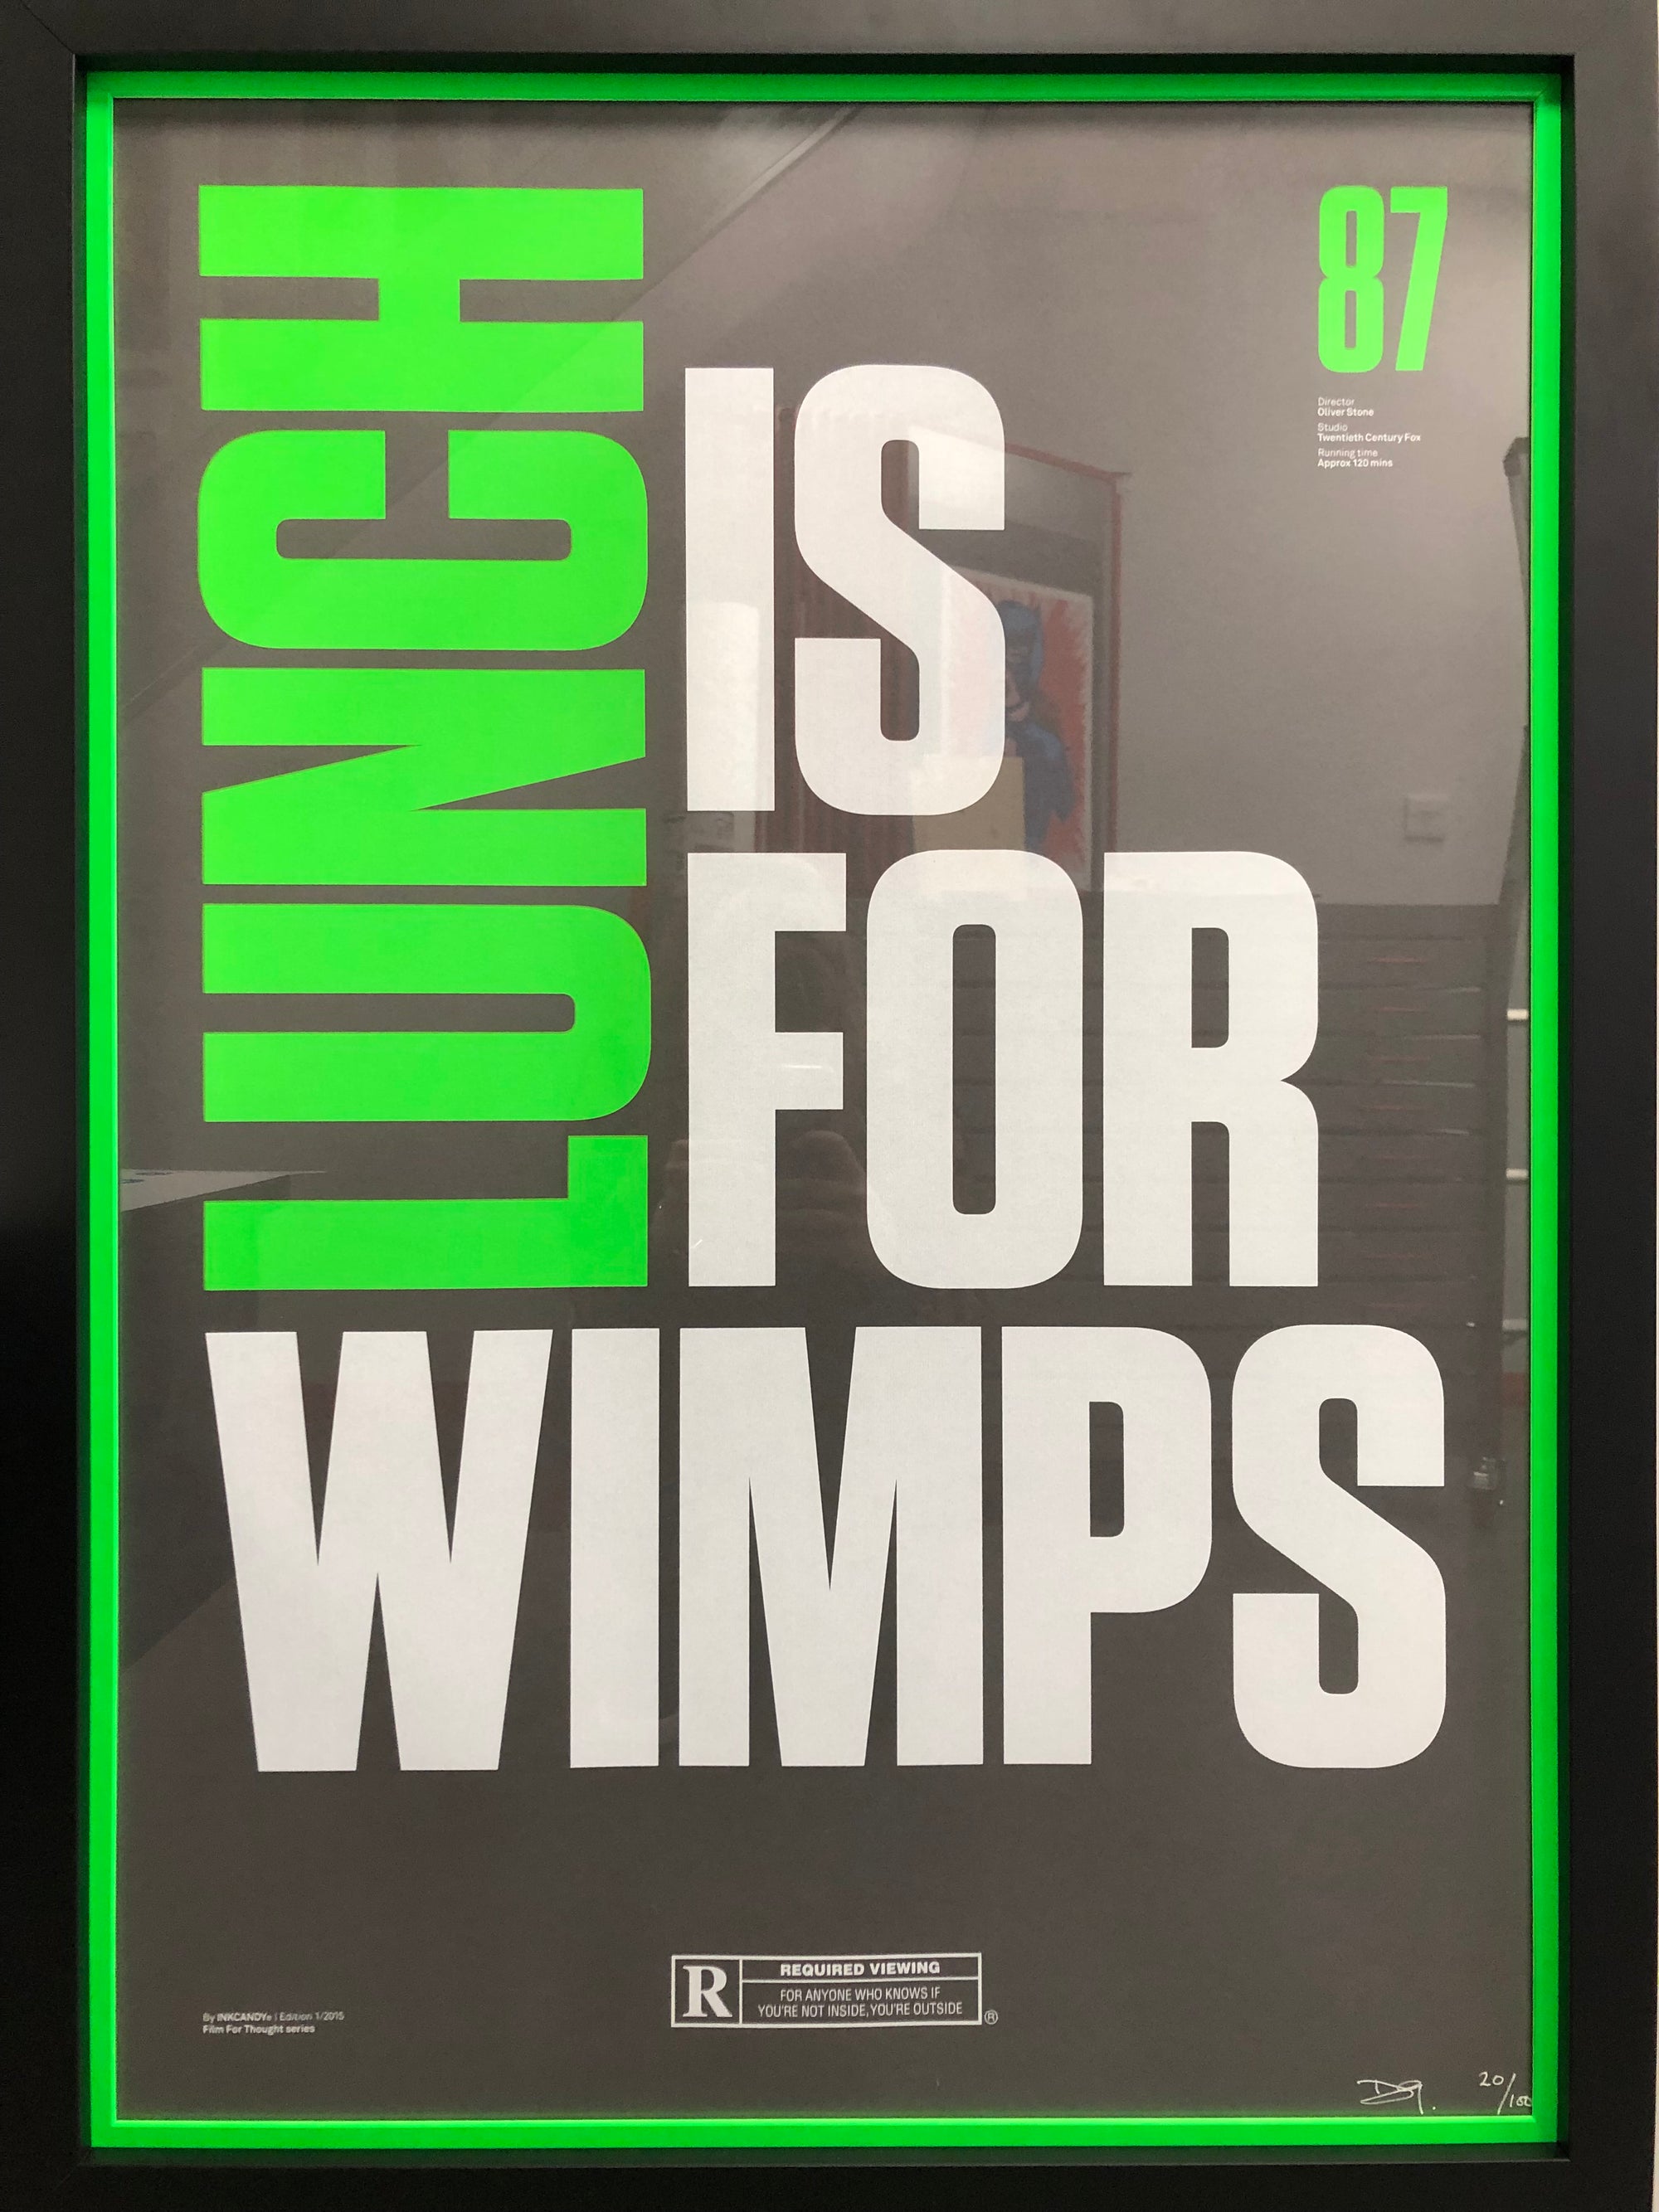 Wimps(Hooked Custom Framing) by Inkcandy